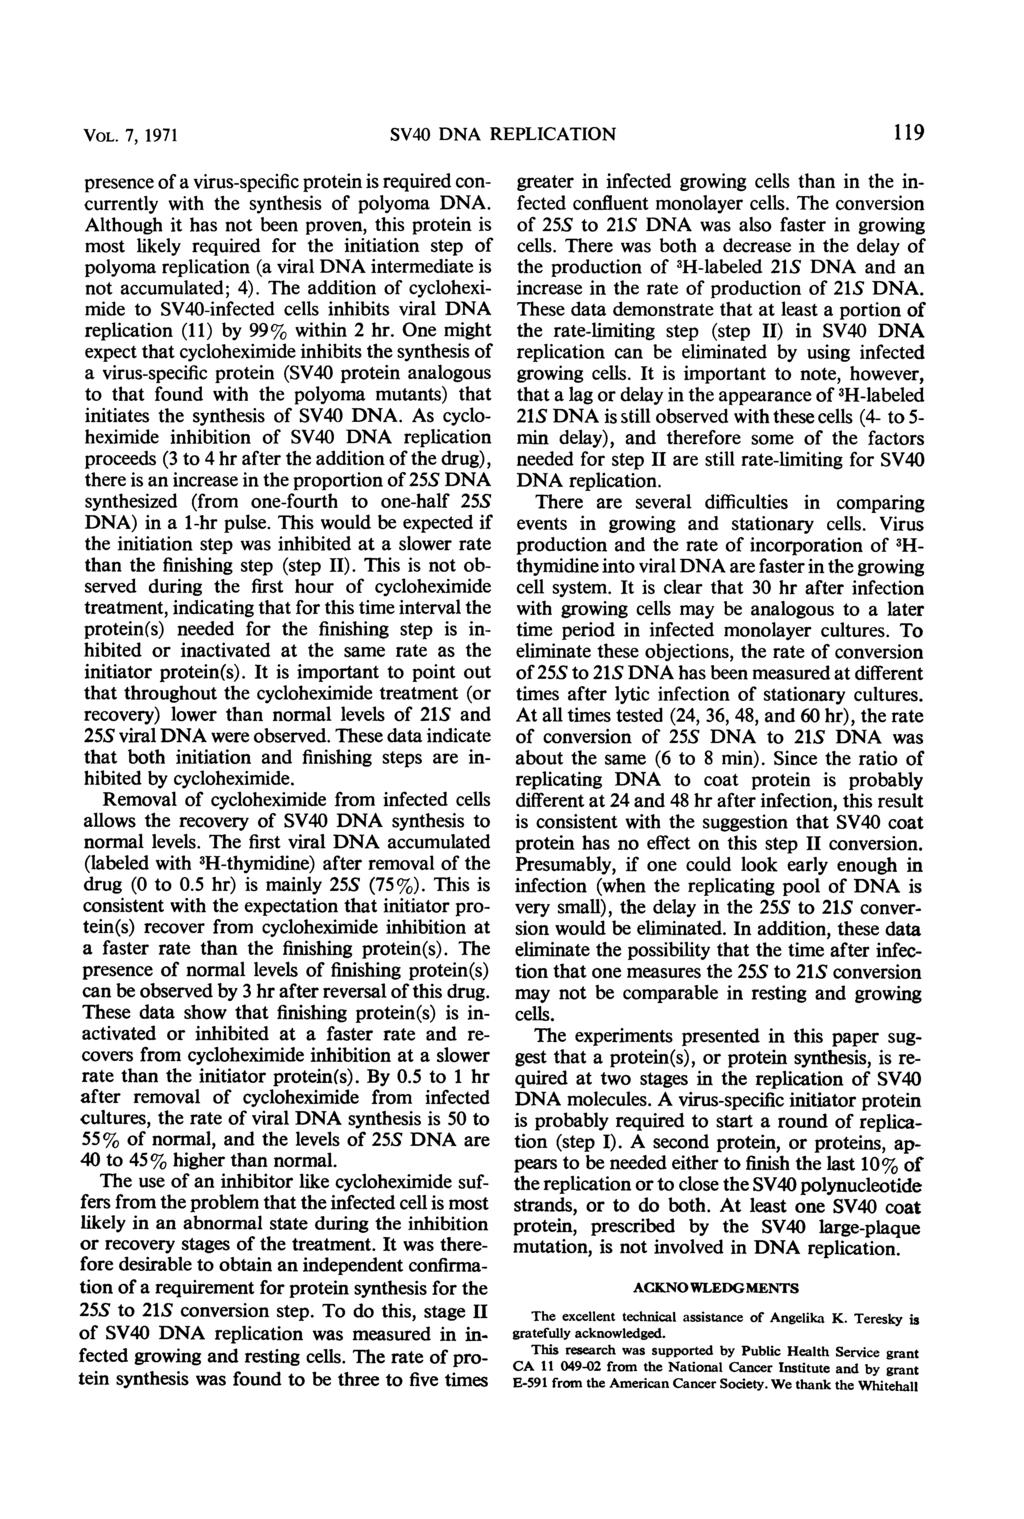 VOL. 7, 1971 SV40 DNA REPLICATION 119 presence of a virus-specific protein is required concurrently with the synthesis of polyoma DNA.